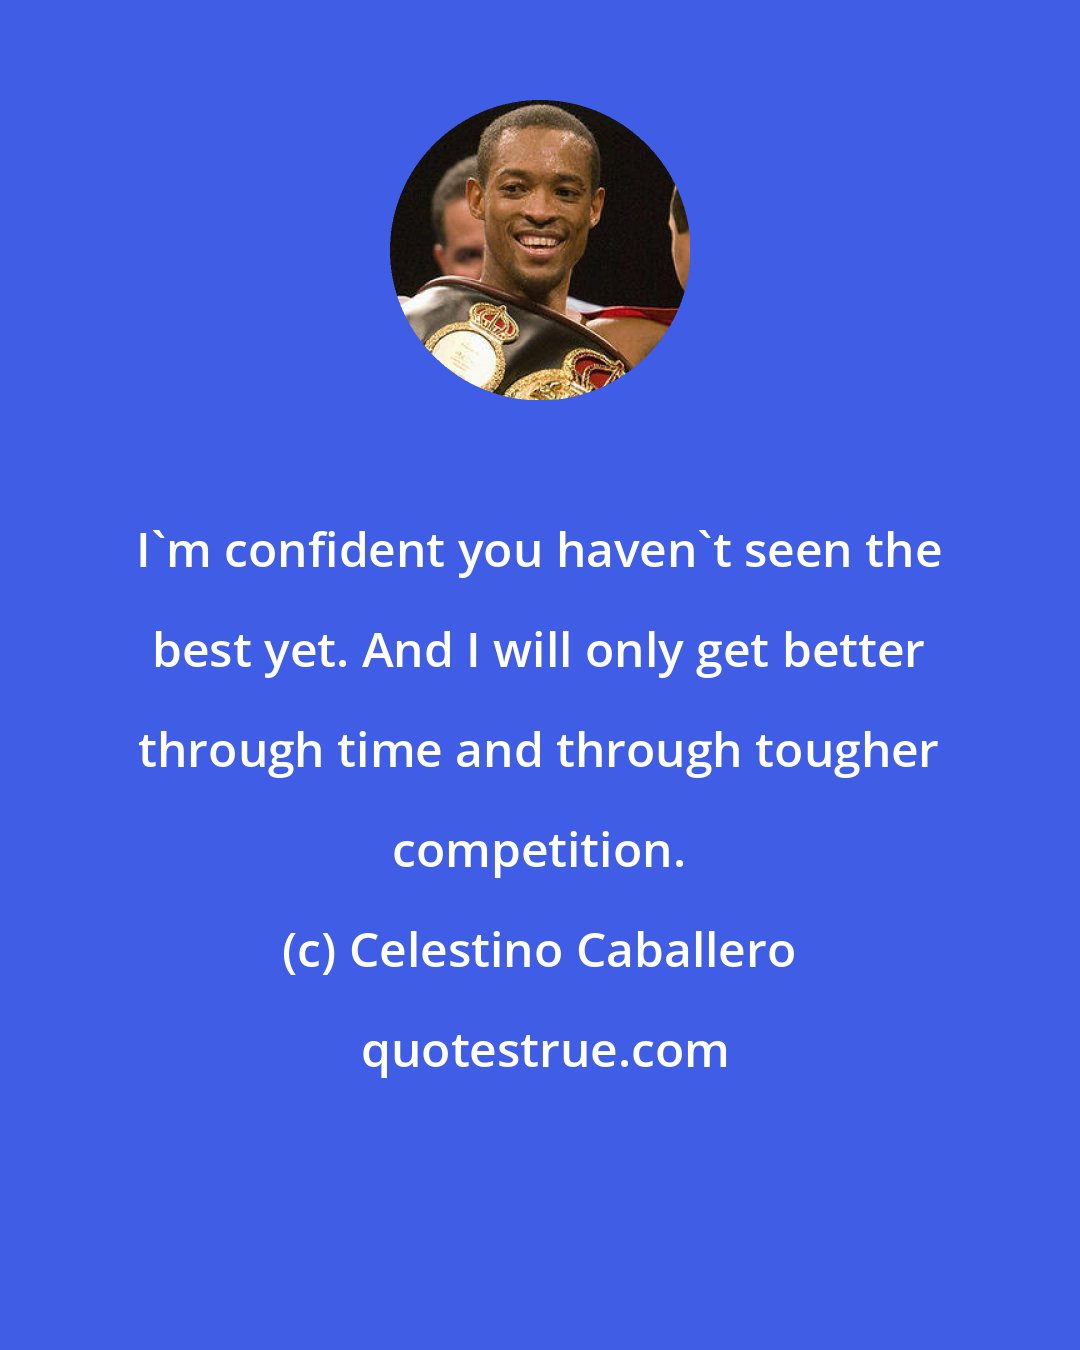 Celestino Caballero: I'm confident you haven't seen the best yet. And I will only get better through time and through tougher competition.